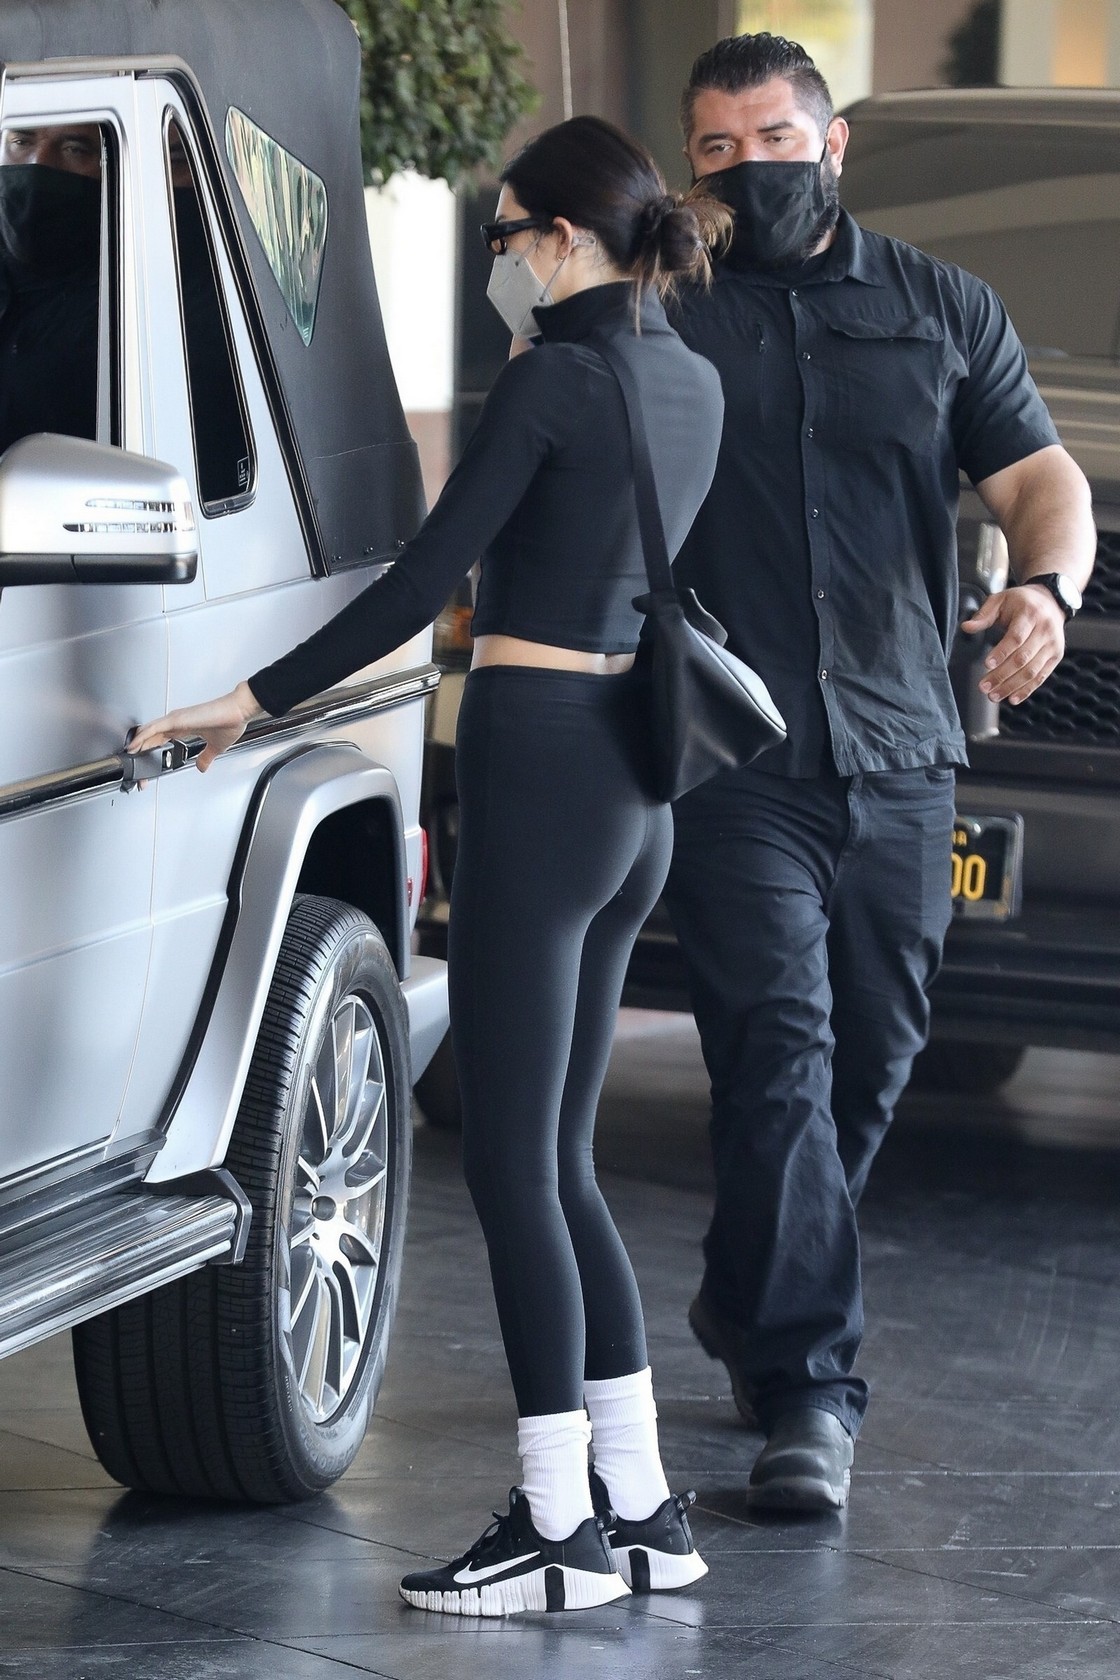 Kendall Jenner Flaunts Her Tight Ass And Cmeltoe TheFappening.Pro 5 - Kendall Jenner Hot In Tight Leggings (12 Photos)